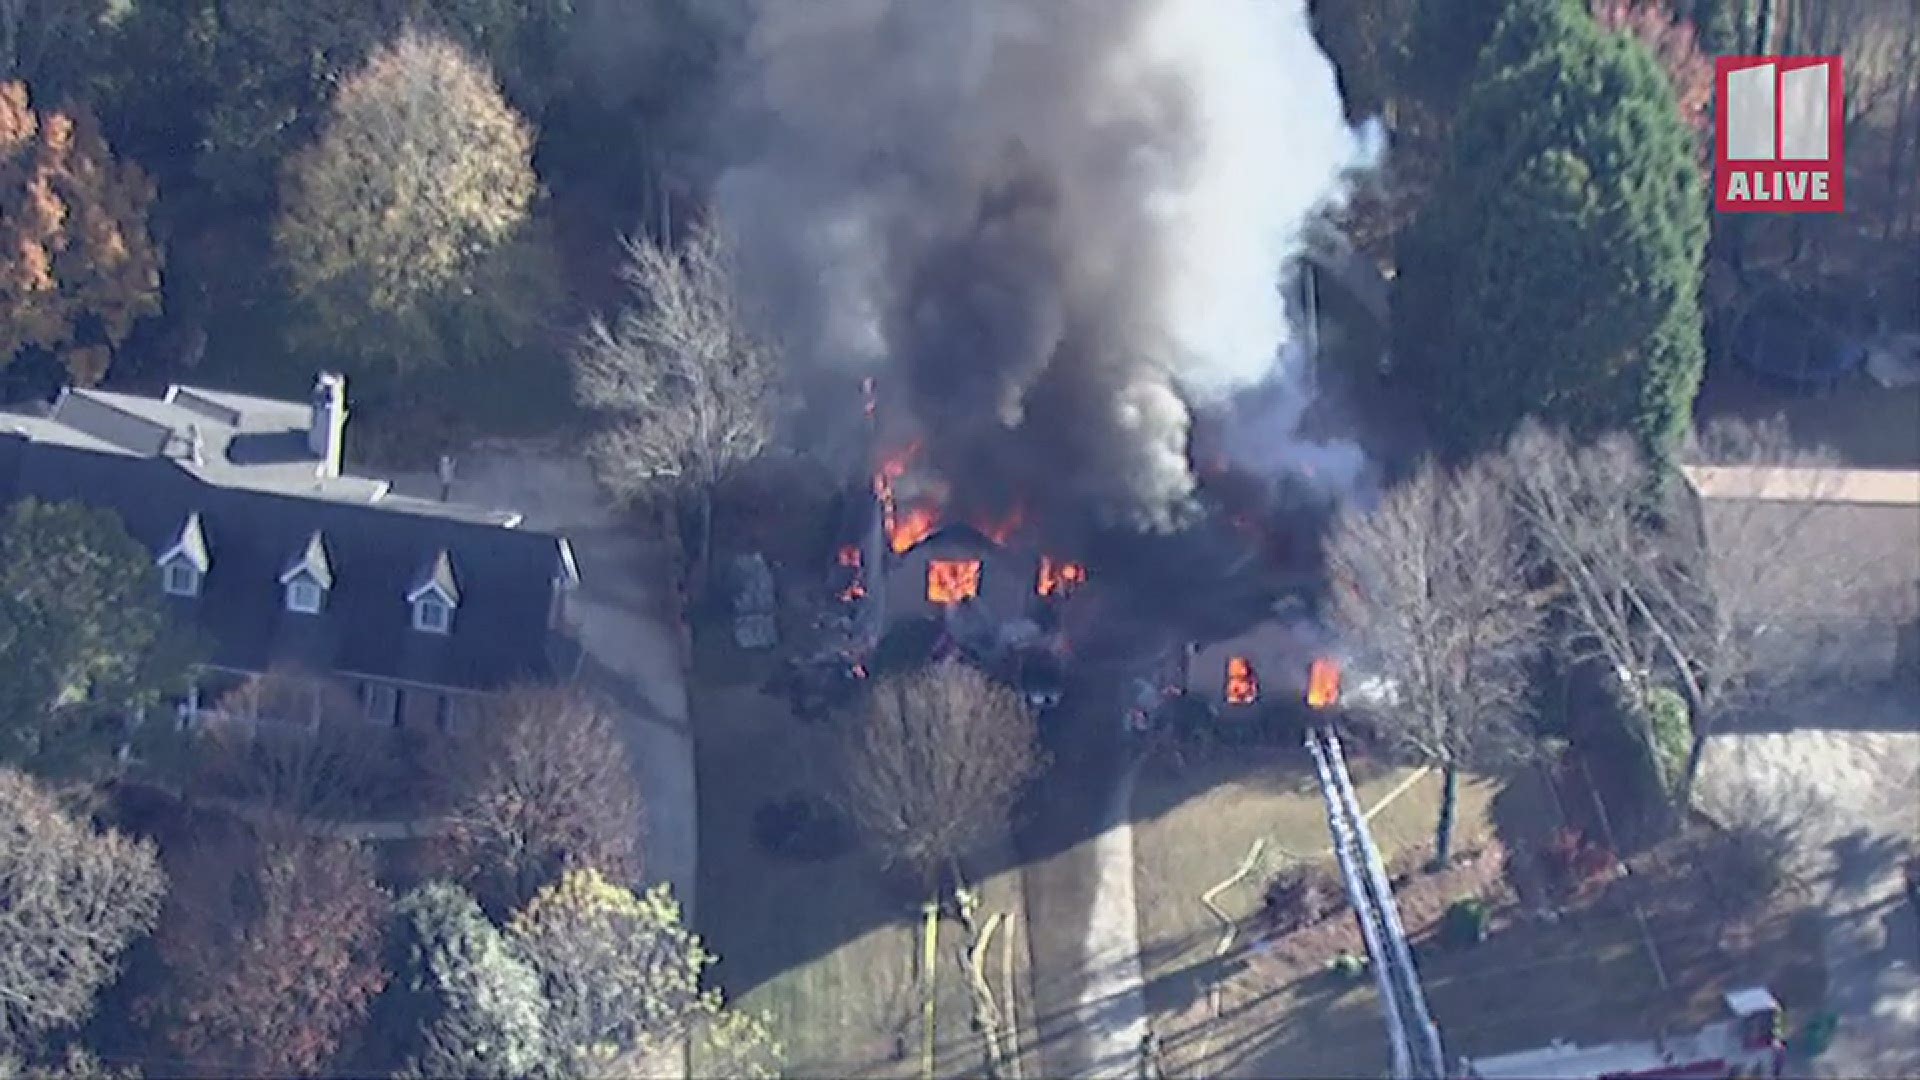 Officials said there were no injuries reported following a house fire in Dunwoody on Wednesday afternoon.